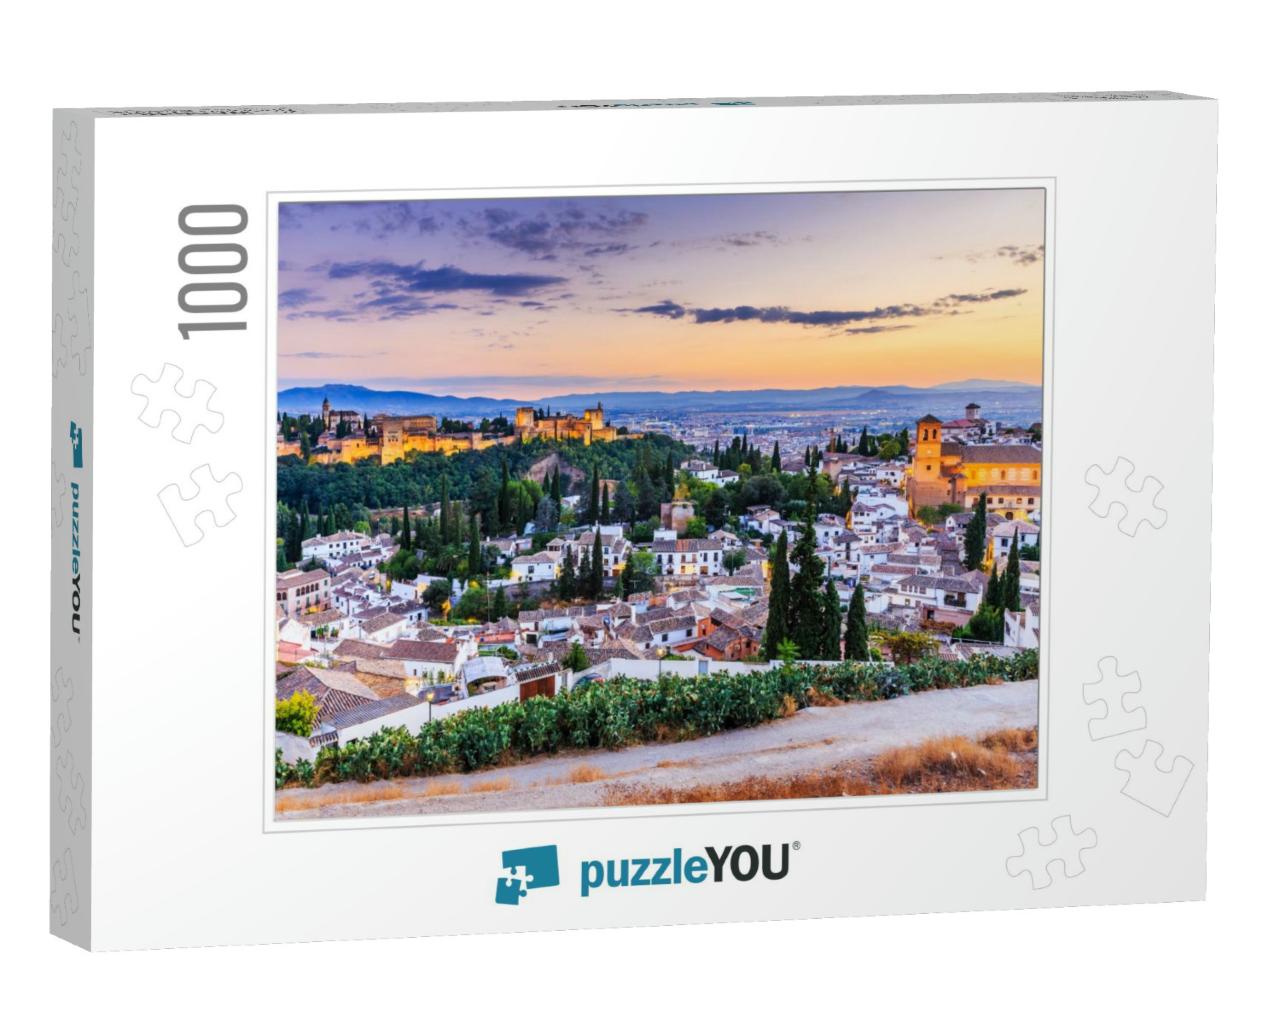 Alhambra of Granada, Spain. Alhambra Fortress & Albaicin... Jigsaw Puzzle with 1000 pieces